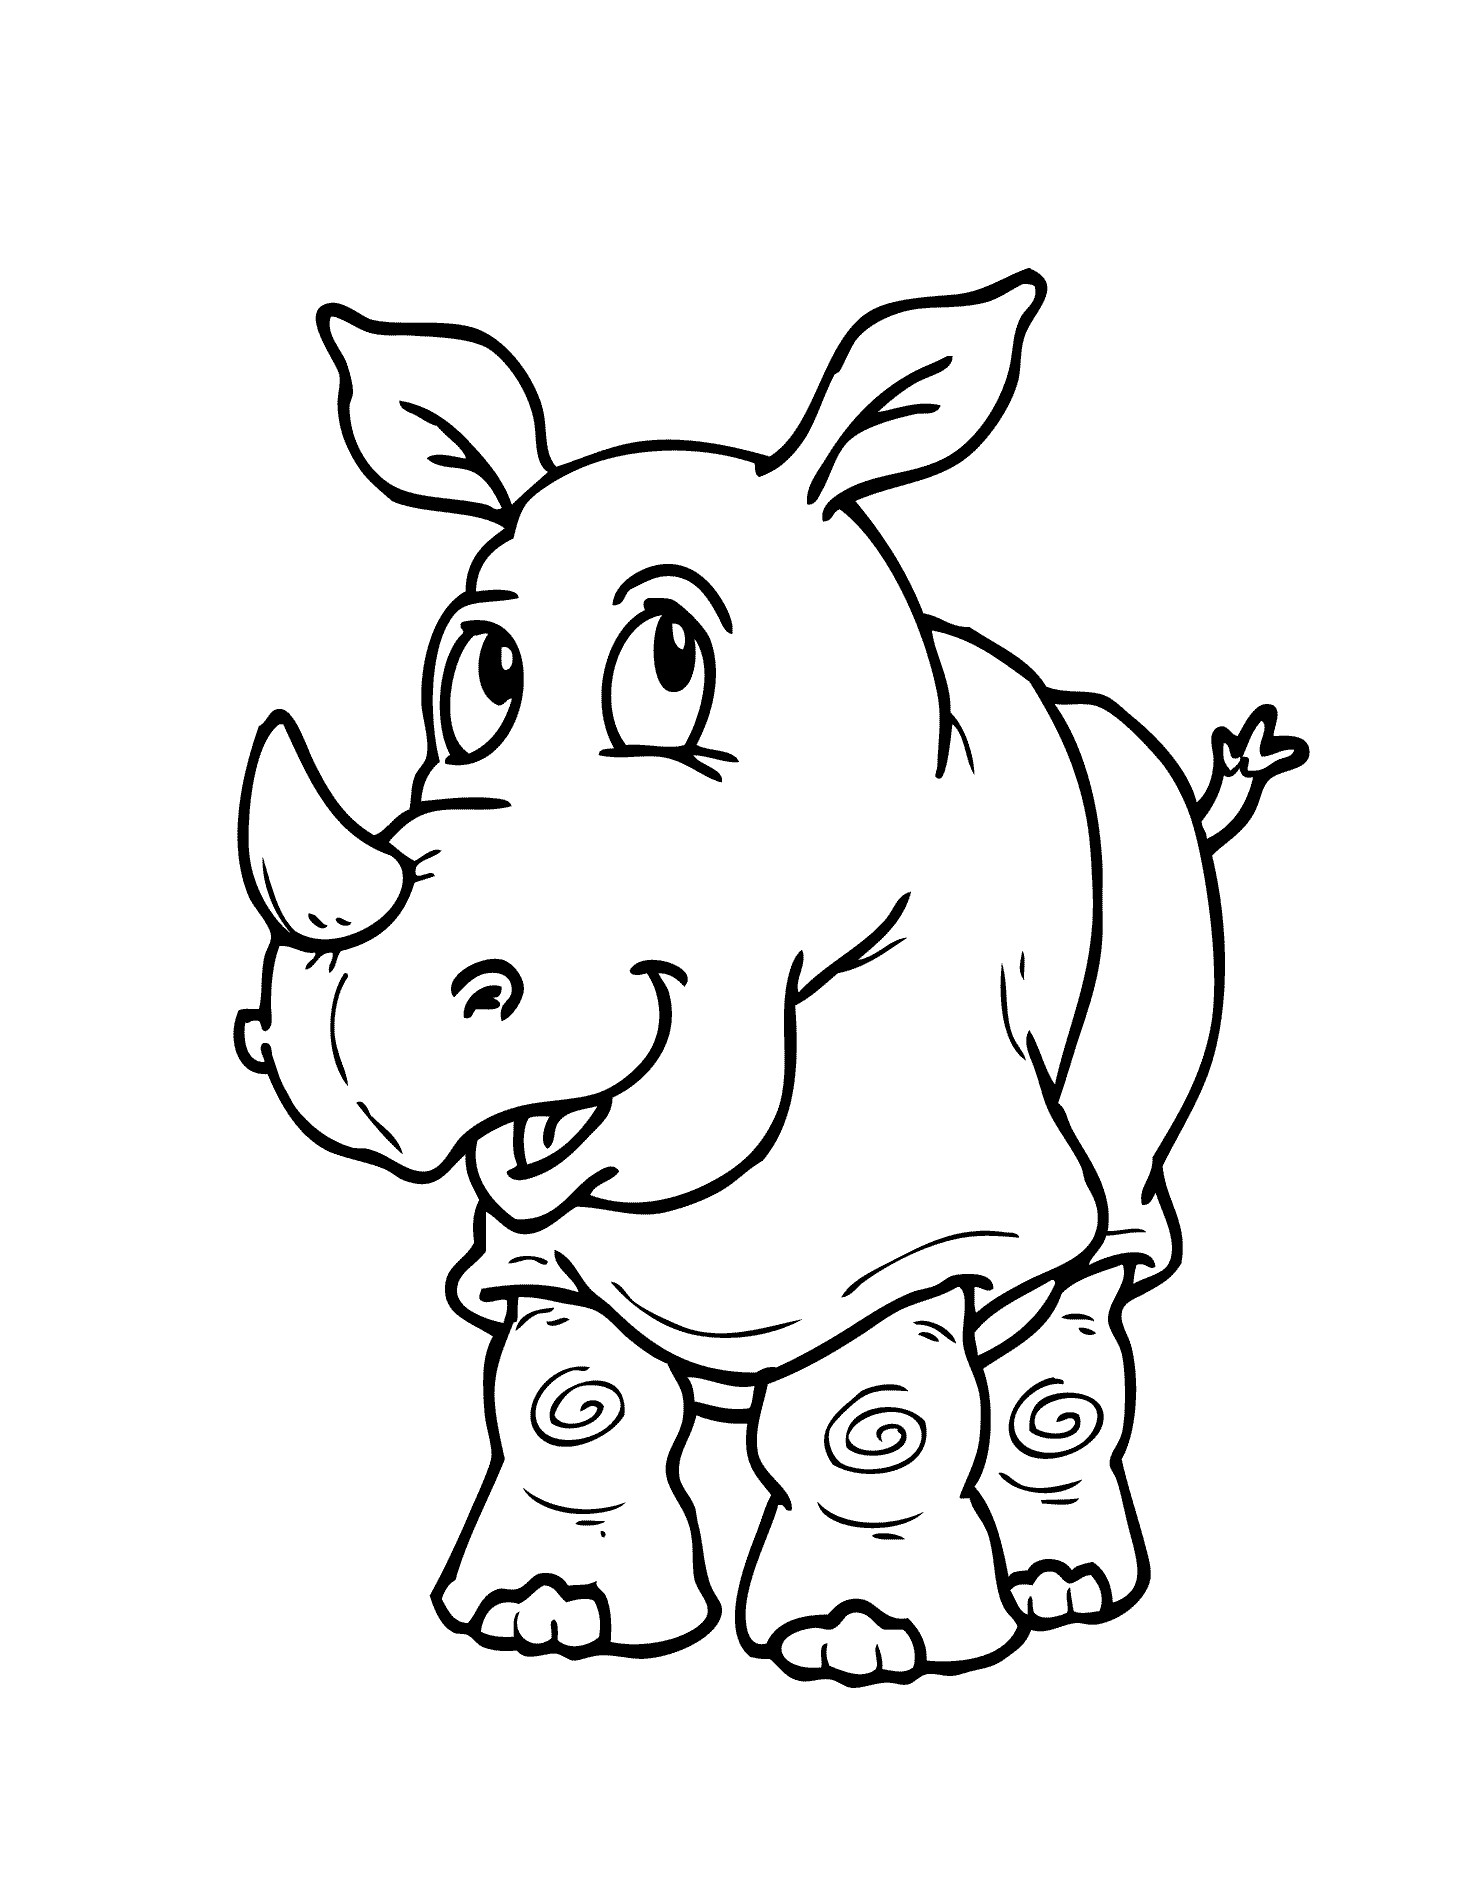 Animal Coloring Pages For Kids
 Animal coloring sheets for kids Coloring pages for kids